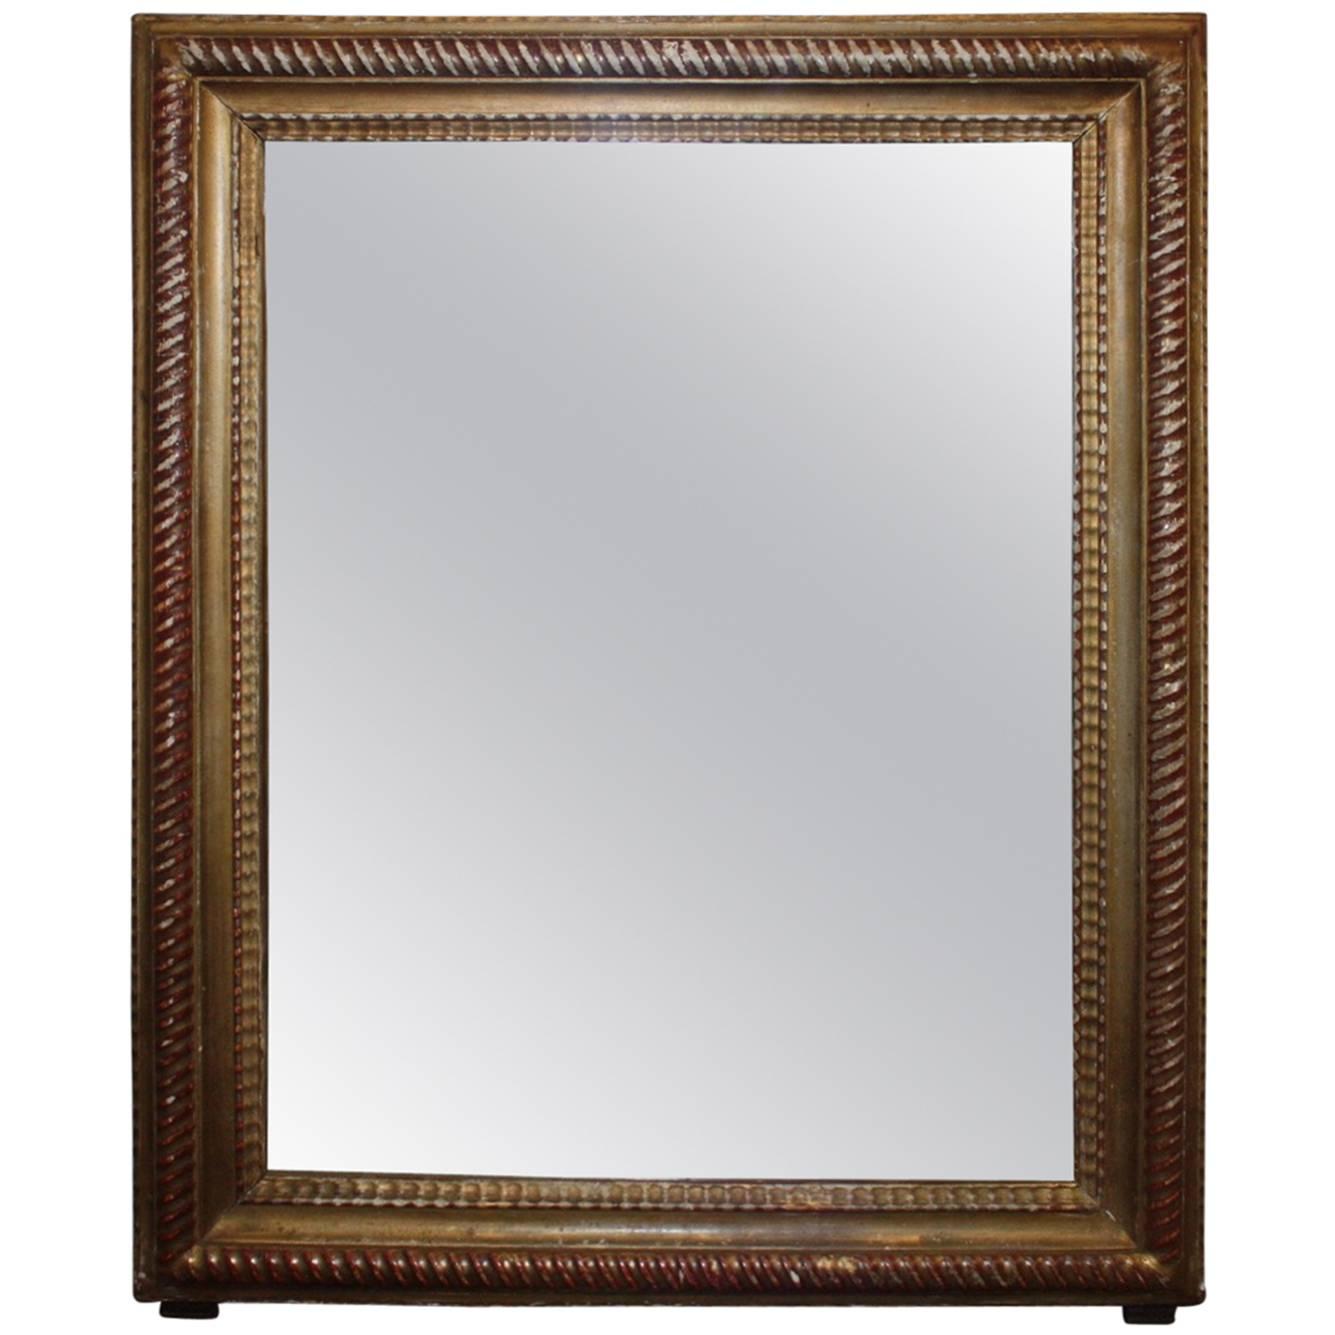 French Early 19th Century Mirror